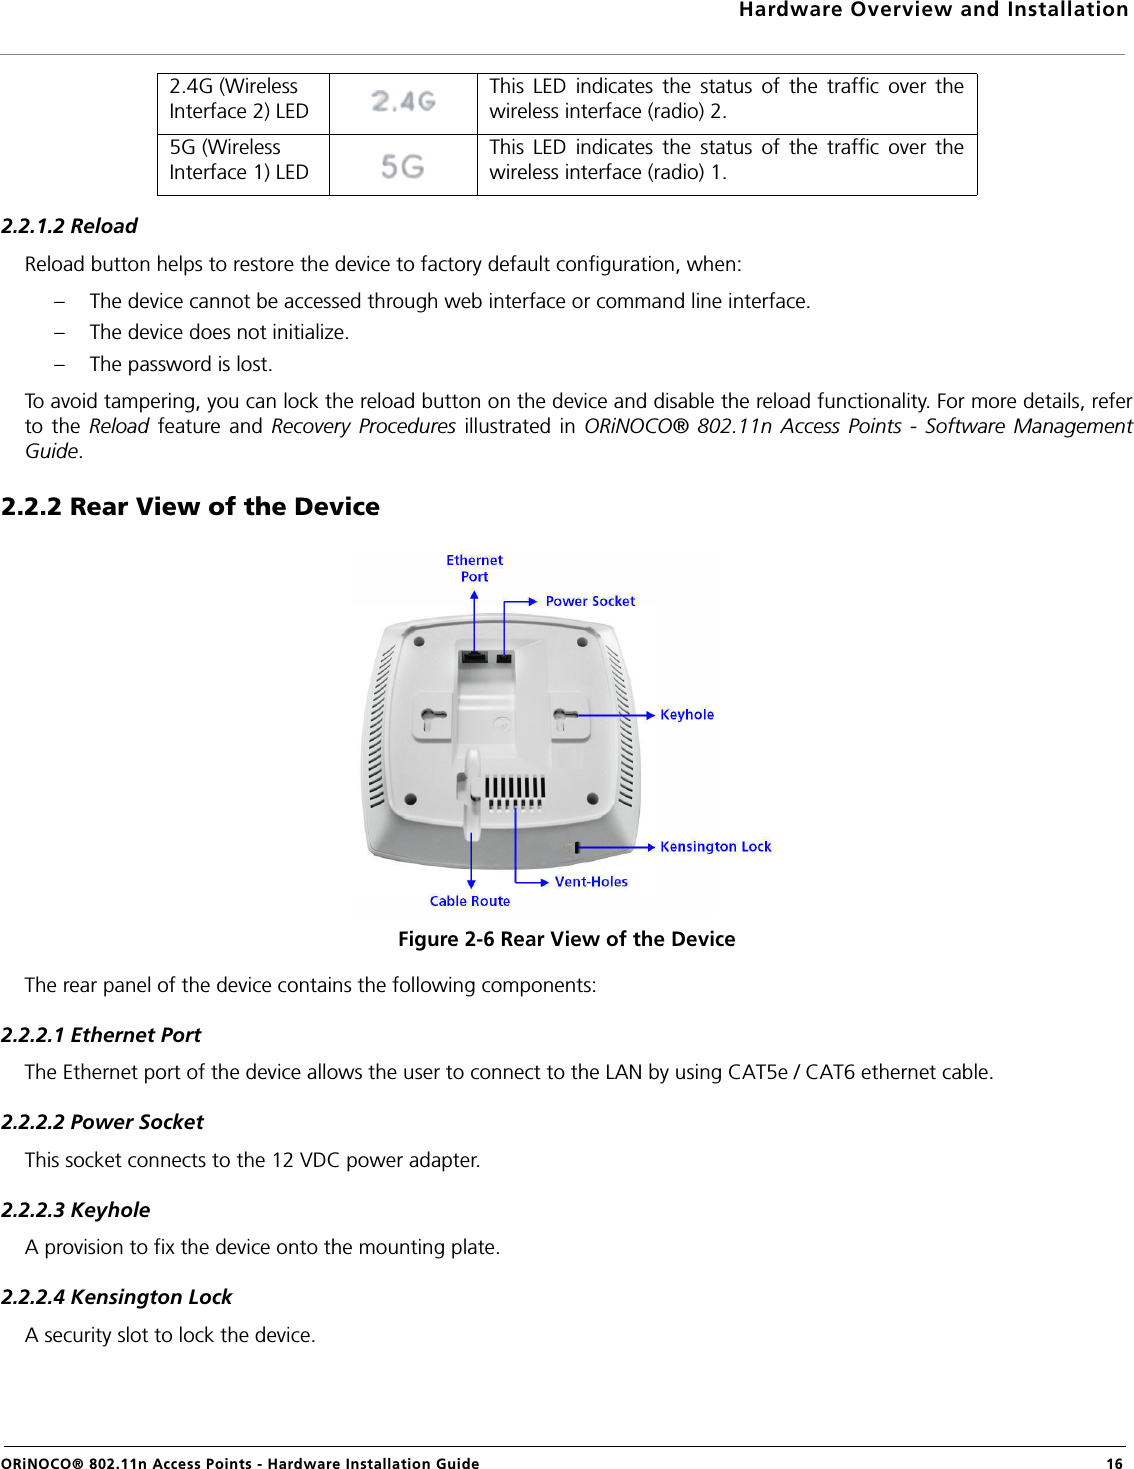 Hardware Overview and InstallationORiNOCO® 802.11n Access Points - Hardware Installation Guide  162.2.1.2 ReloadReload button helps to restore the device to factory default configuration, when:– The device cannot be accessed through web interface or command line interface.– The device does not initialize.– The password is lost.To avoid tampering, you can lock the reload button on the device and disable the reload functionality. For more details, referto the Reload feature and Recovery Procedures illustrated in ORiNOCO® 802.11n Access Points - Software ManagementGuide.2.2.2 Rear View of the DeviceFigure 2-6 Rear View of the DeviceThe rear panel of the device contains the following components:2.2.2.1 Ethernet PortThe Ethernet port of the device allows the user to connect to the LAN by using CAT5e / CAT6 ethernet cable.2.2.2.2 Power SocketThis socket connects to the 12 VDC power adapter.2.2.2.3 KeyholeA provision to fix the device onto the mounting plate.2.2.2.4 Kensington LockA security slot to lock the device.2.4G (Wireless Interface 2) LEDThis LED indicates the status of the traffic over thewireless interface (radio) 2.5G (Wireless Interface 1) LEDThis LED indicates the status of the traffic over thewireless interface (radio) 1.